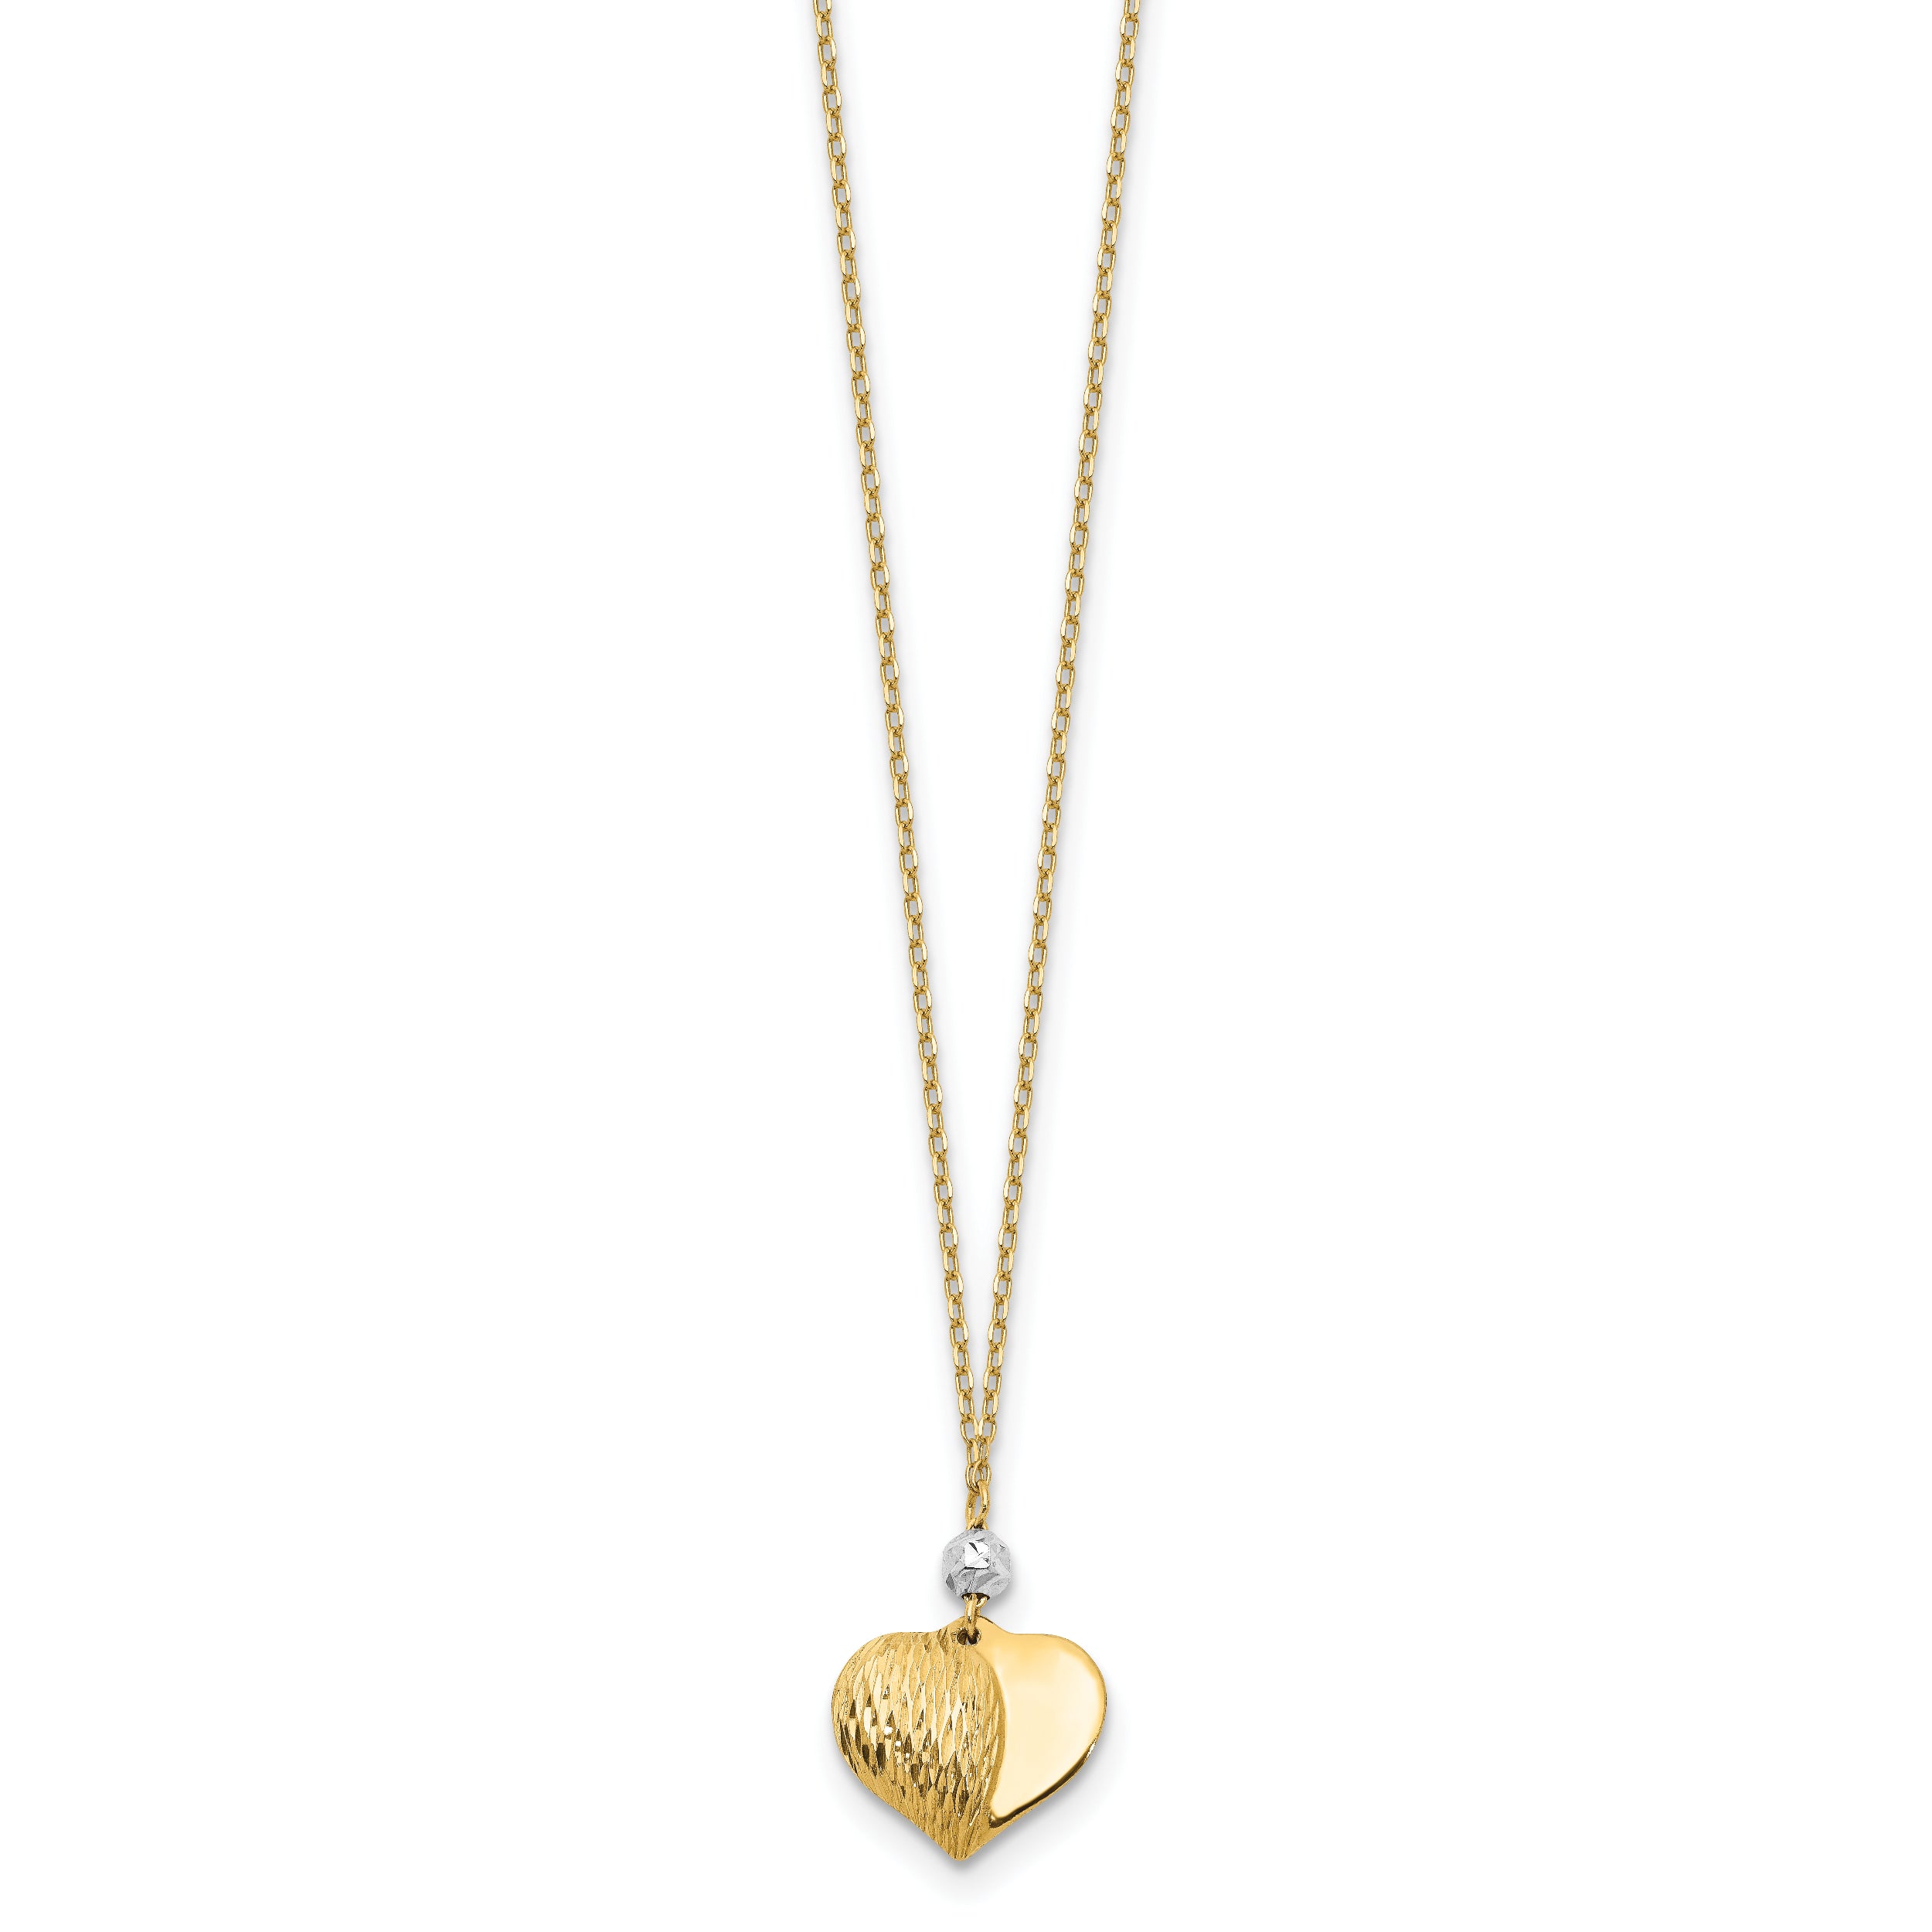 14K Two Tone Polished & D/C Puffed Heart 18 inch Necklace